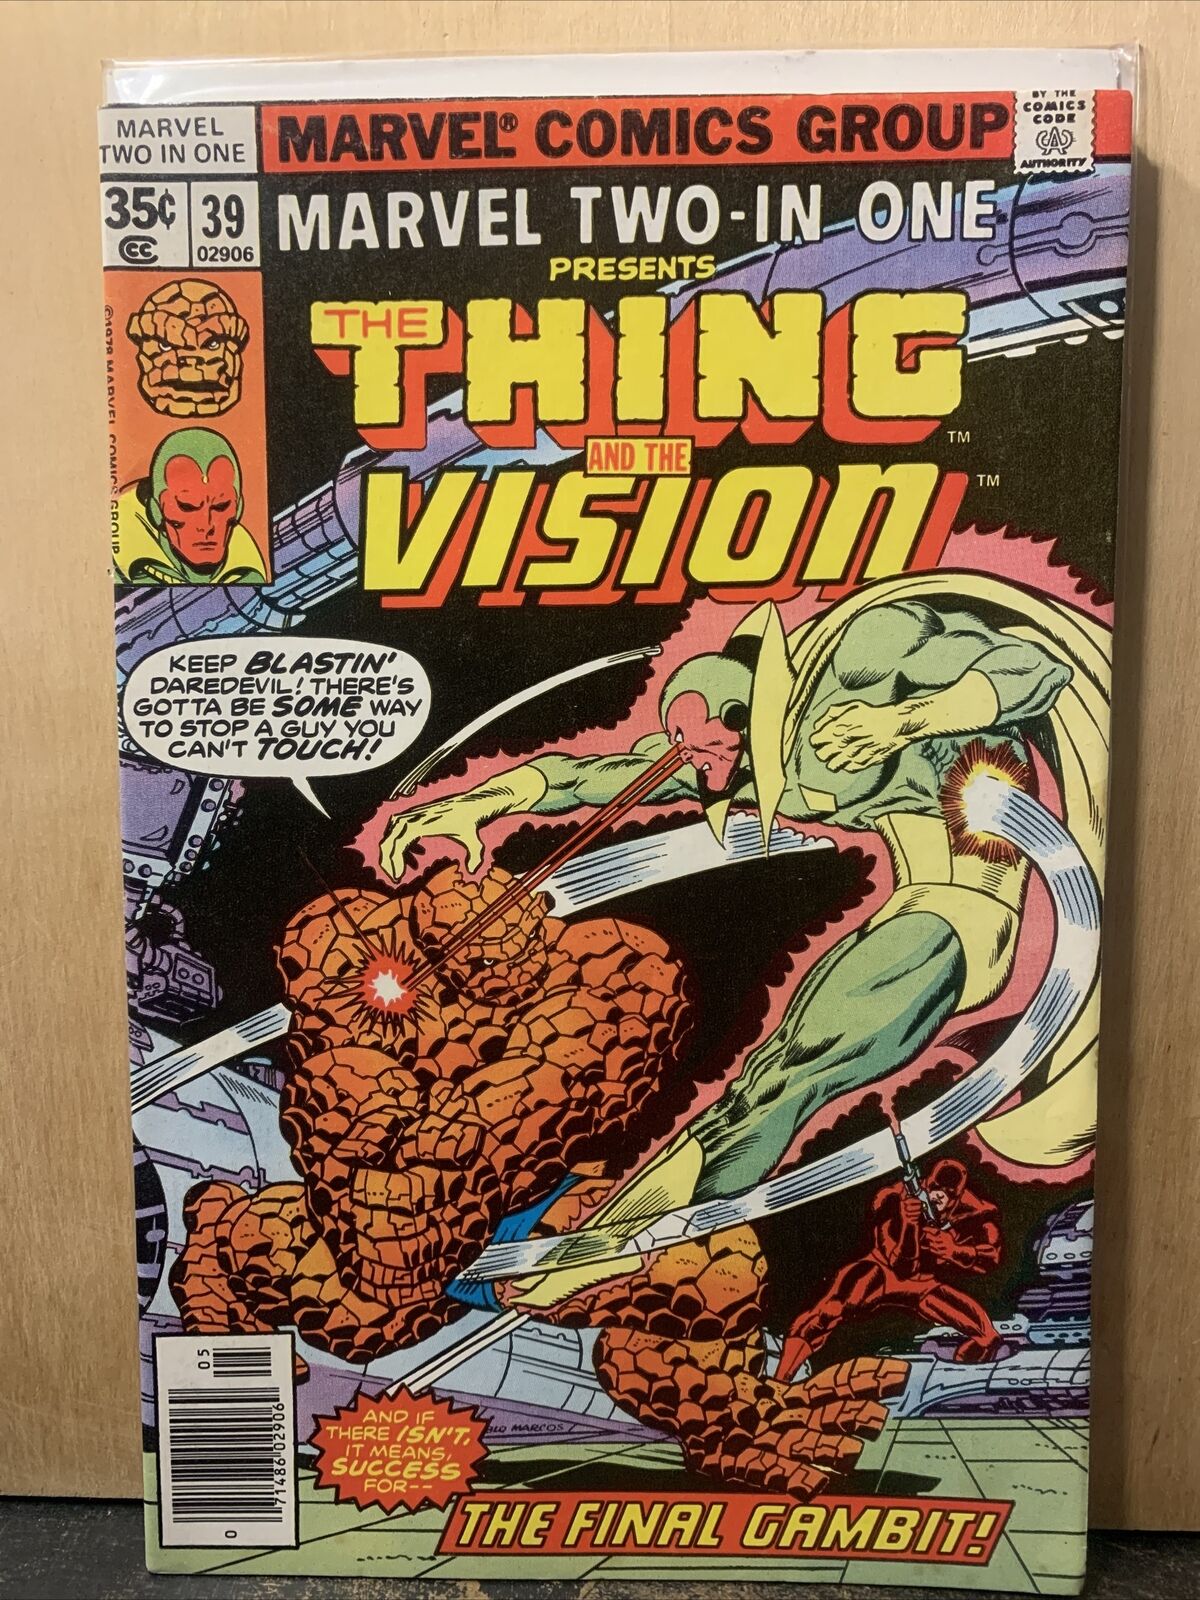 Marvel Two-In-One -The Thing & The Vision- #39 Comic Book 1978.